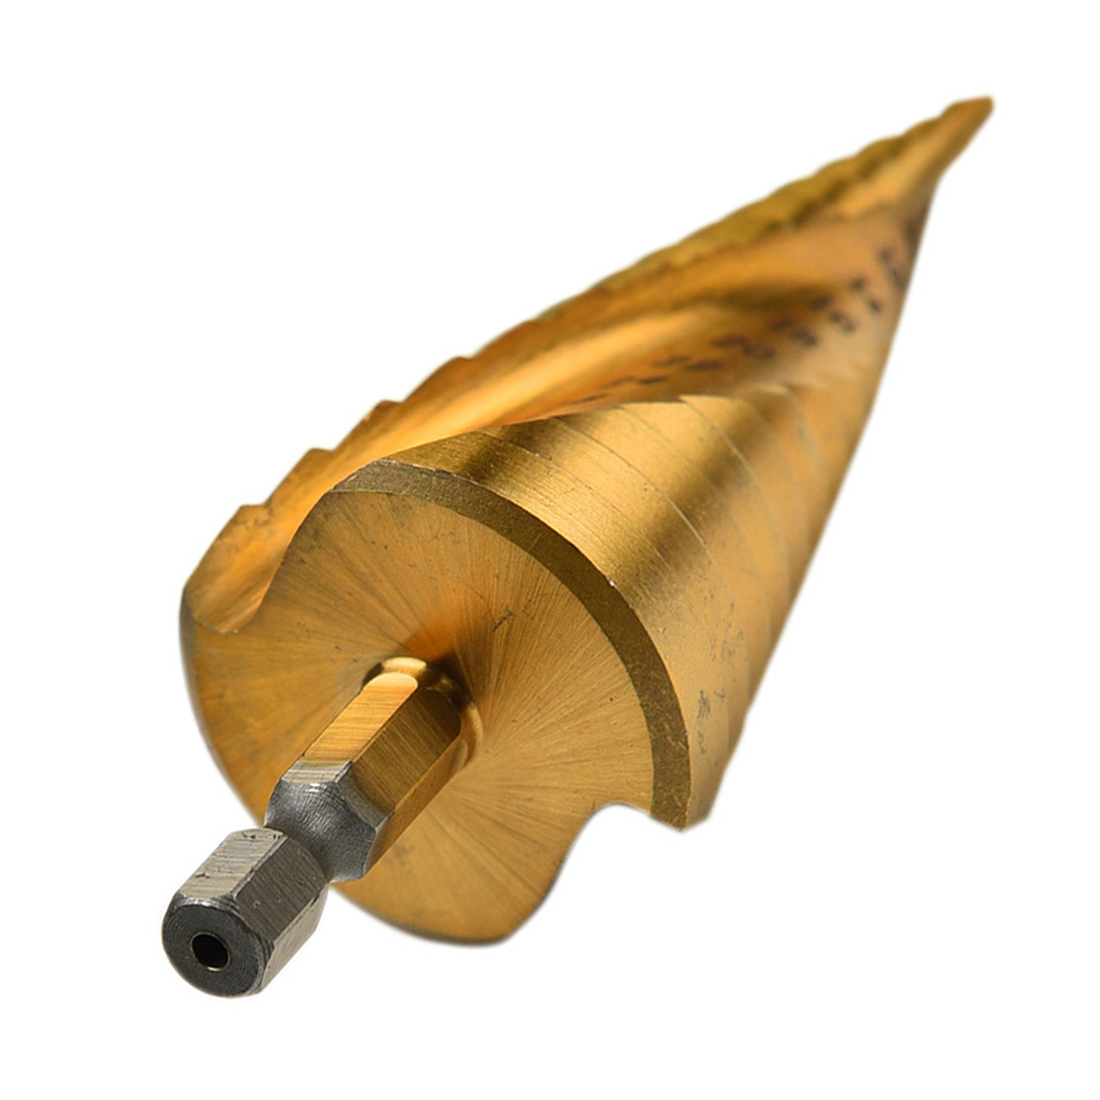 4-12/20/32mm Step Drill Bit HSS Titanium Coated Step Cone Metal Hole Cutter Metal Hex Tapered Drill Power Tools Accessories